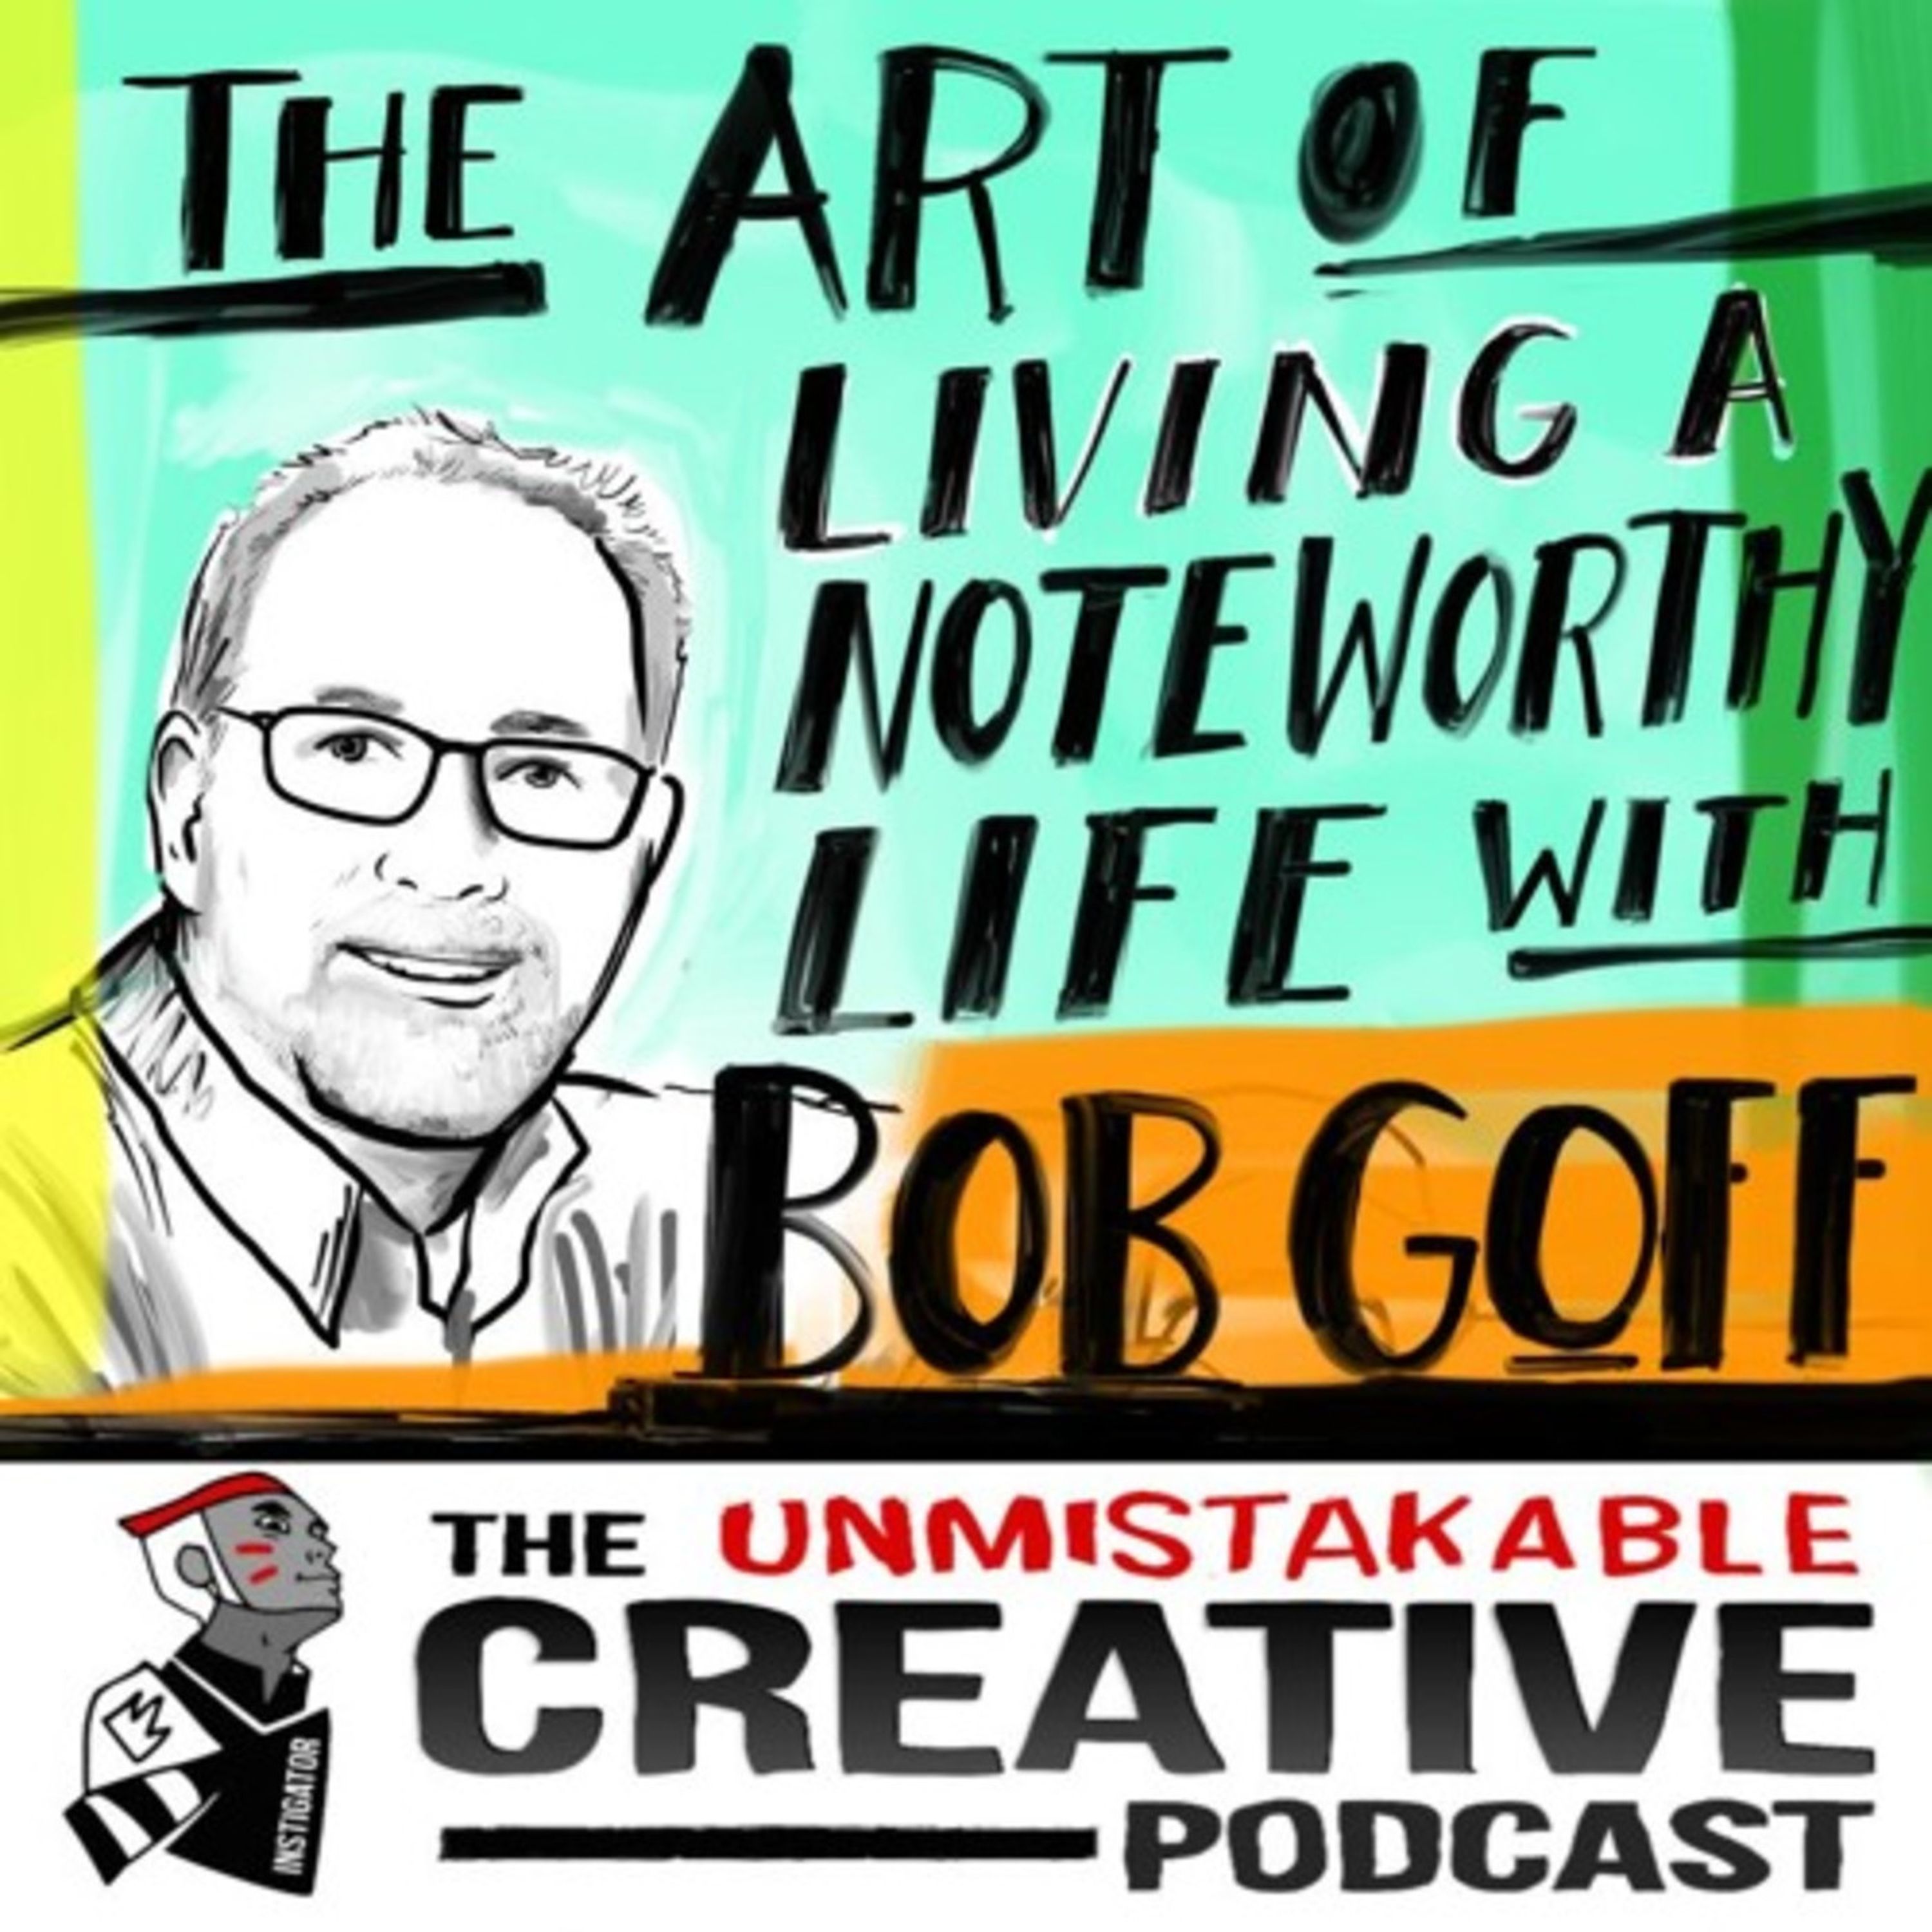 Best of: The Art of Living a Noteworthy Life with Bob Goff